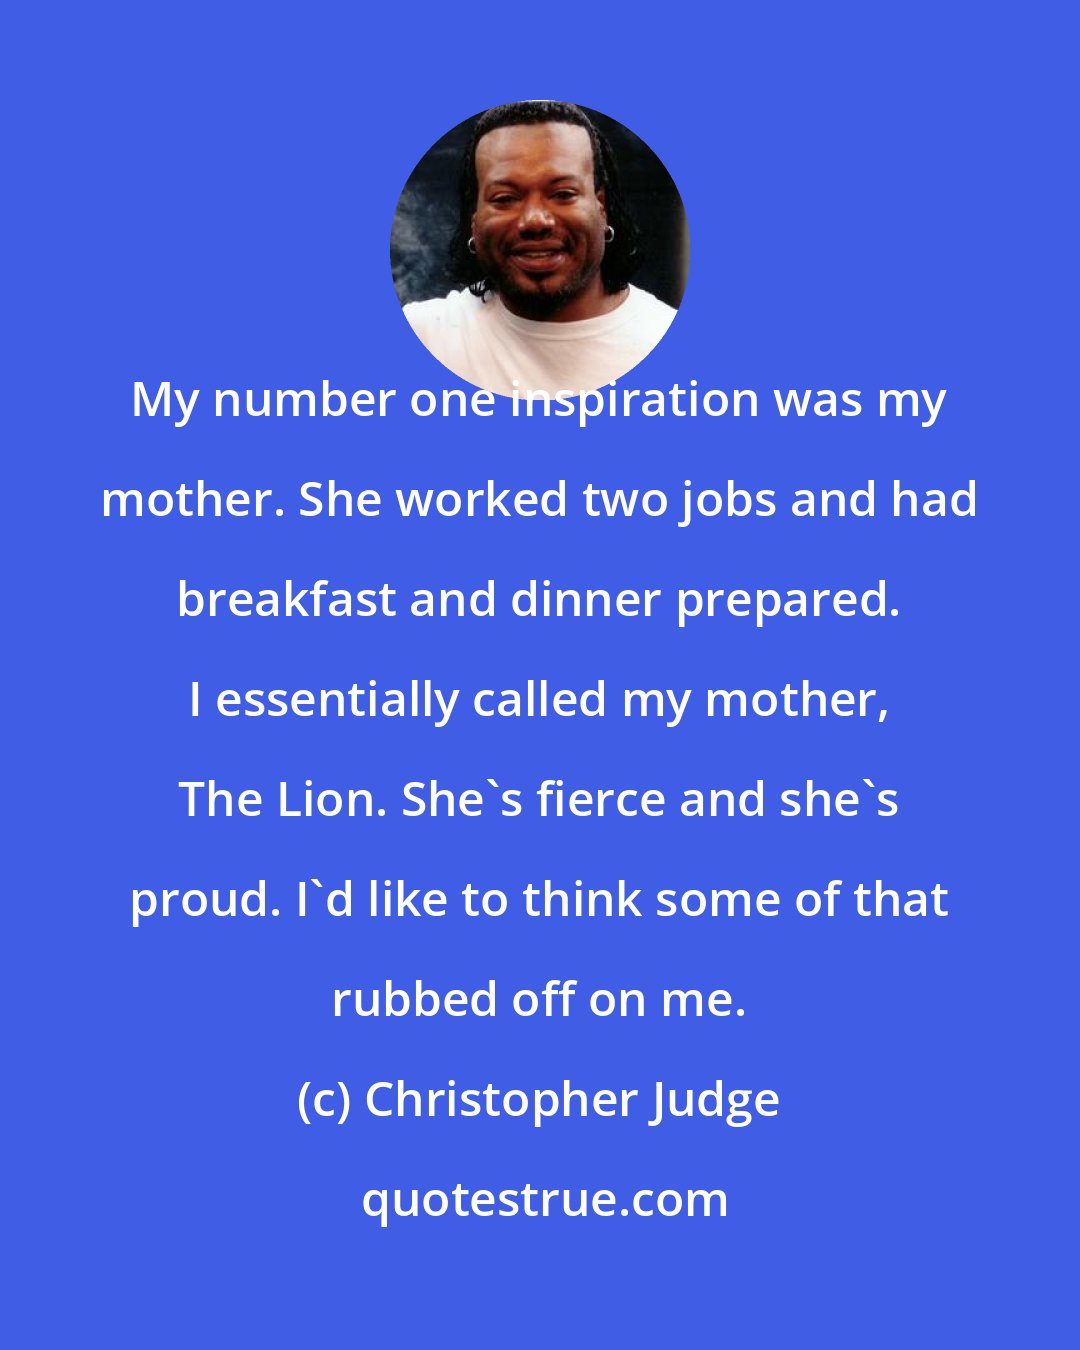 Christopher Judge: My number one inspiration was my mother. She worked two jobs and had breakfast and dinner prepared. I essentially called my mother, The Lion. She's fierce and she's proud. I'd like to think some of that rubbed off on me.